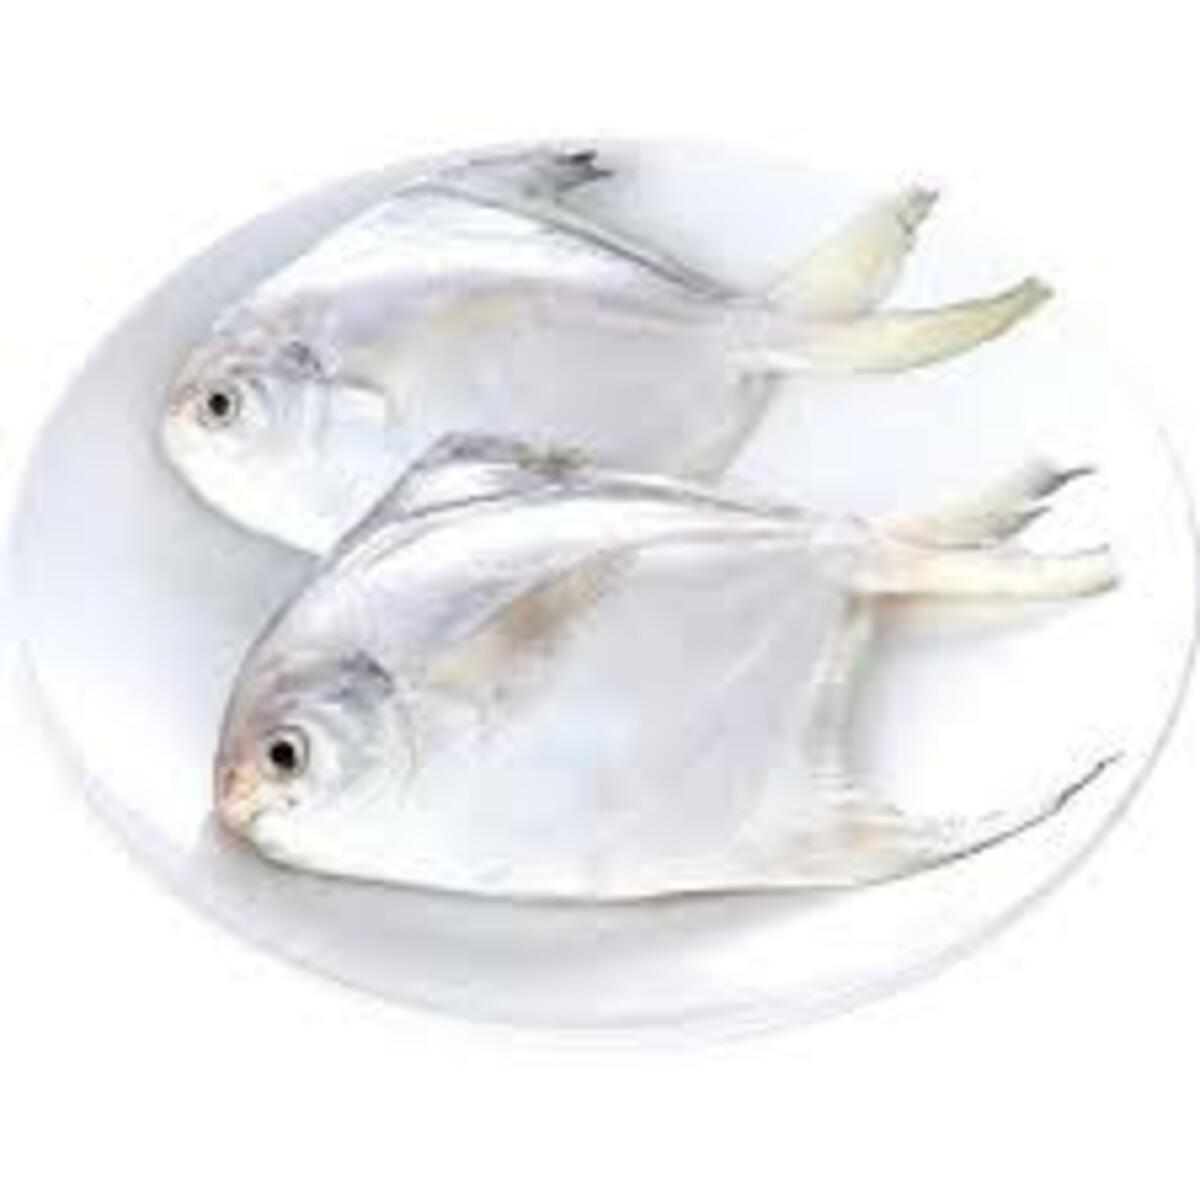 White Pomfret Small 1Kg Approx Weight